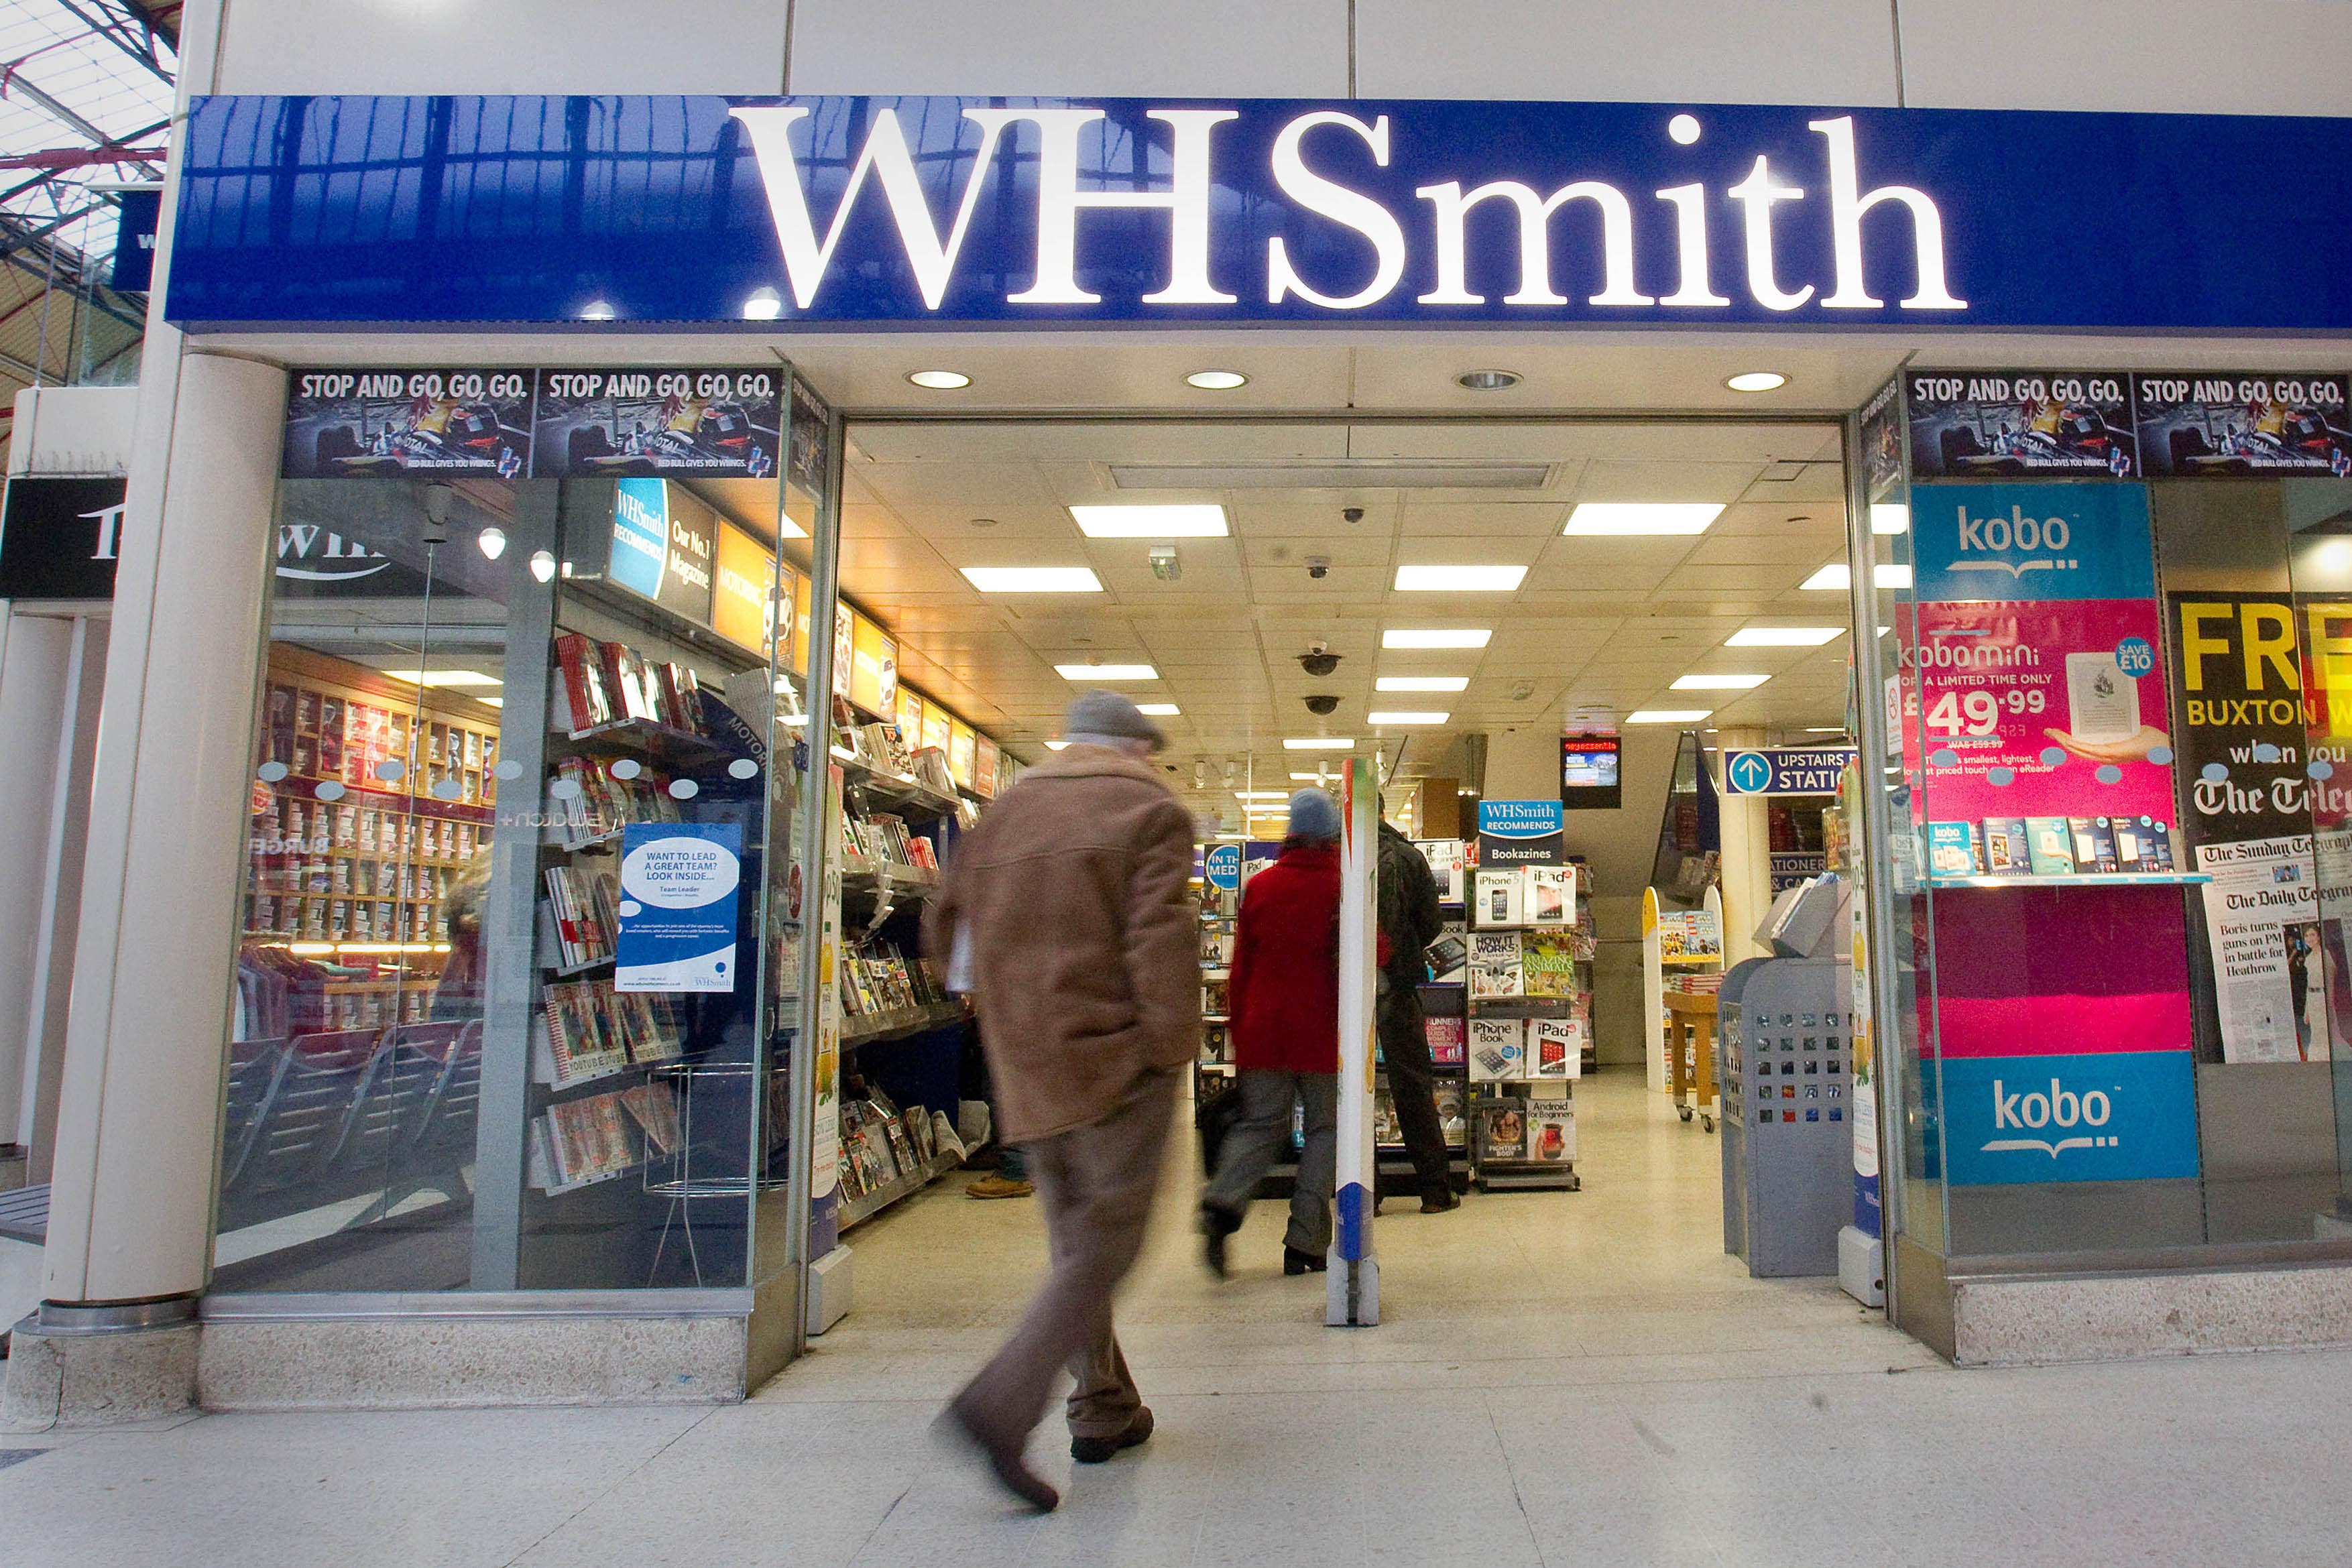 WH Smith has seen its shift to being a “one-stop shop” for travel essentials pay off (Philip Toscano/PA)